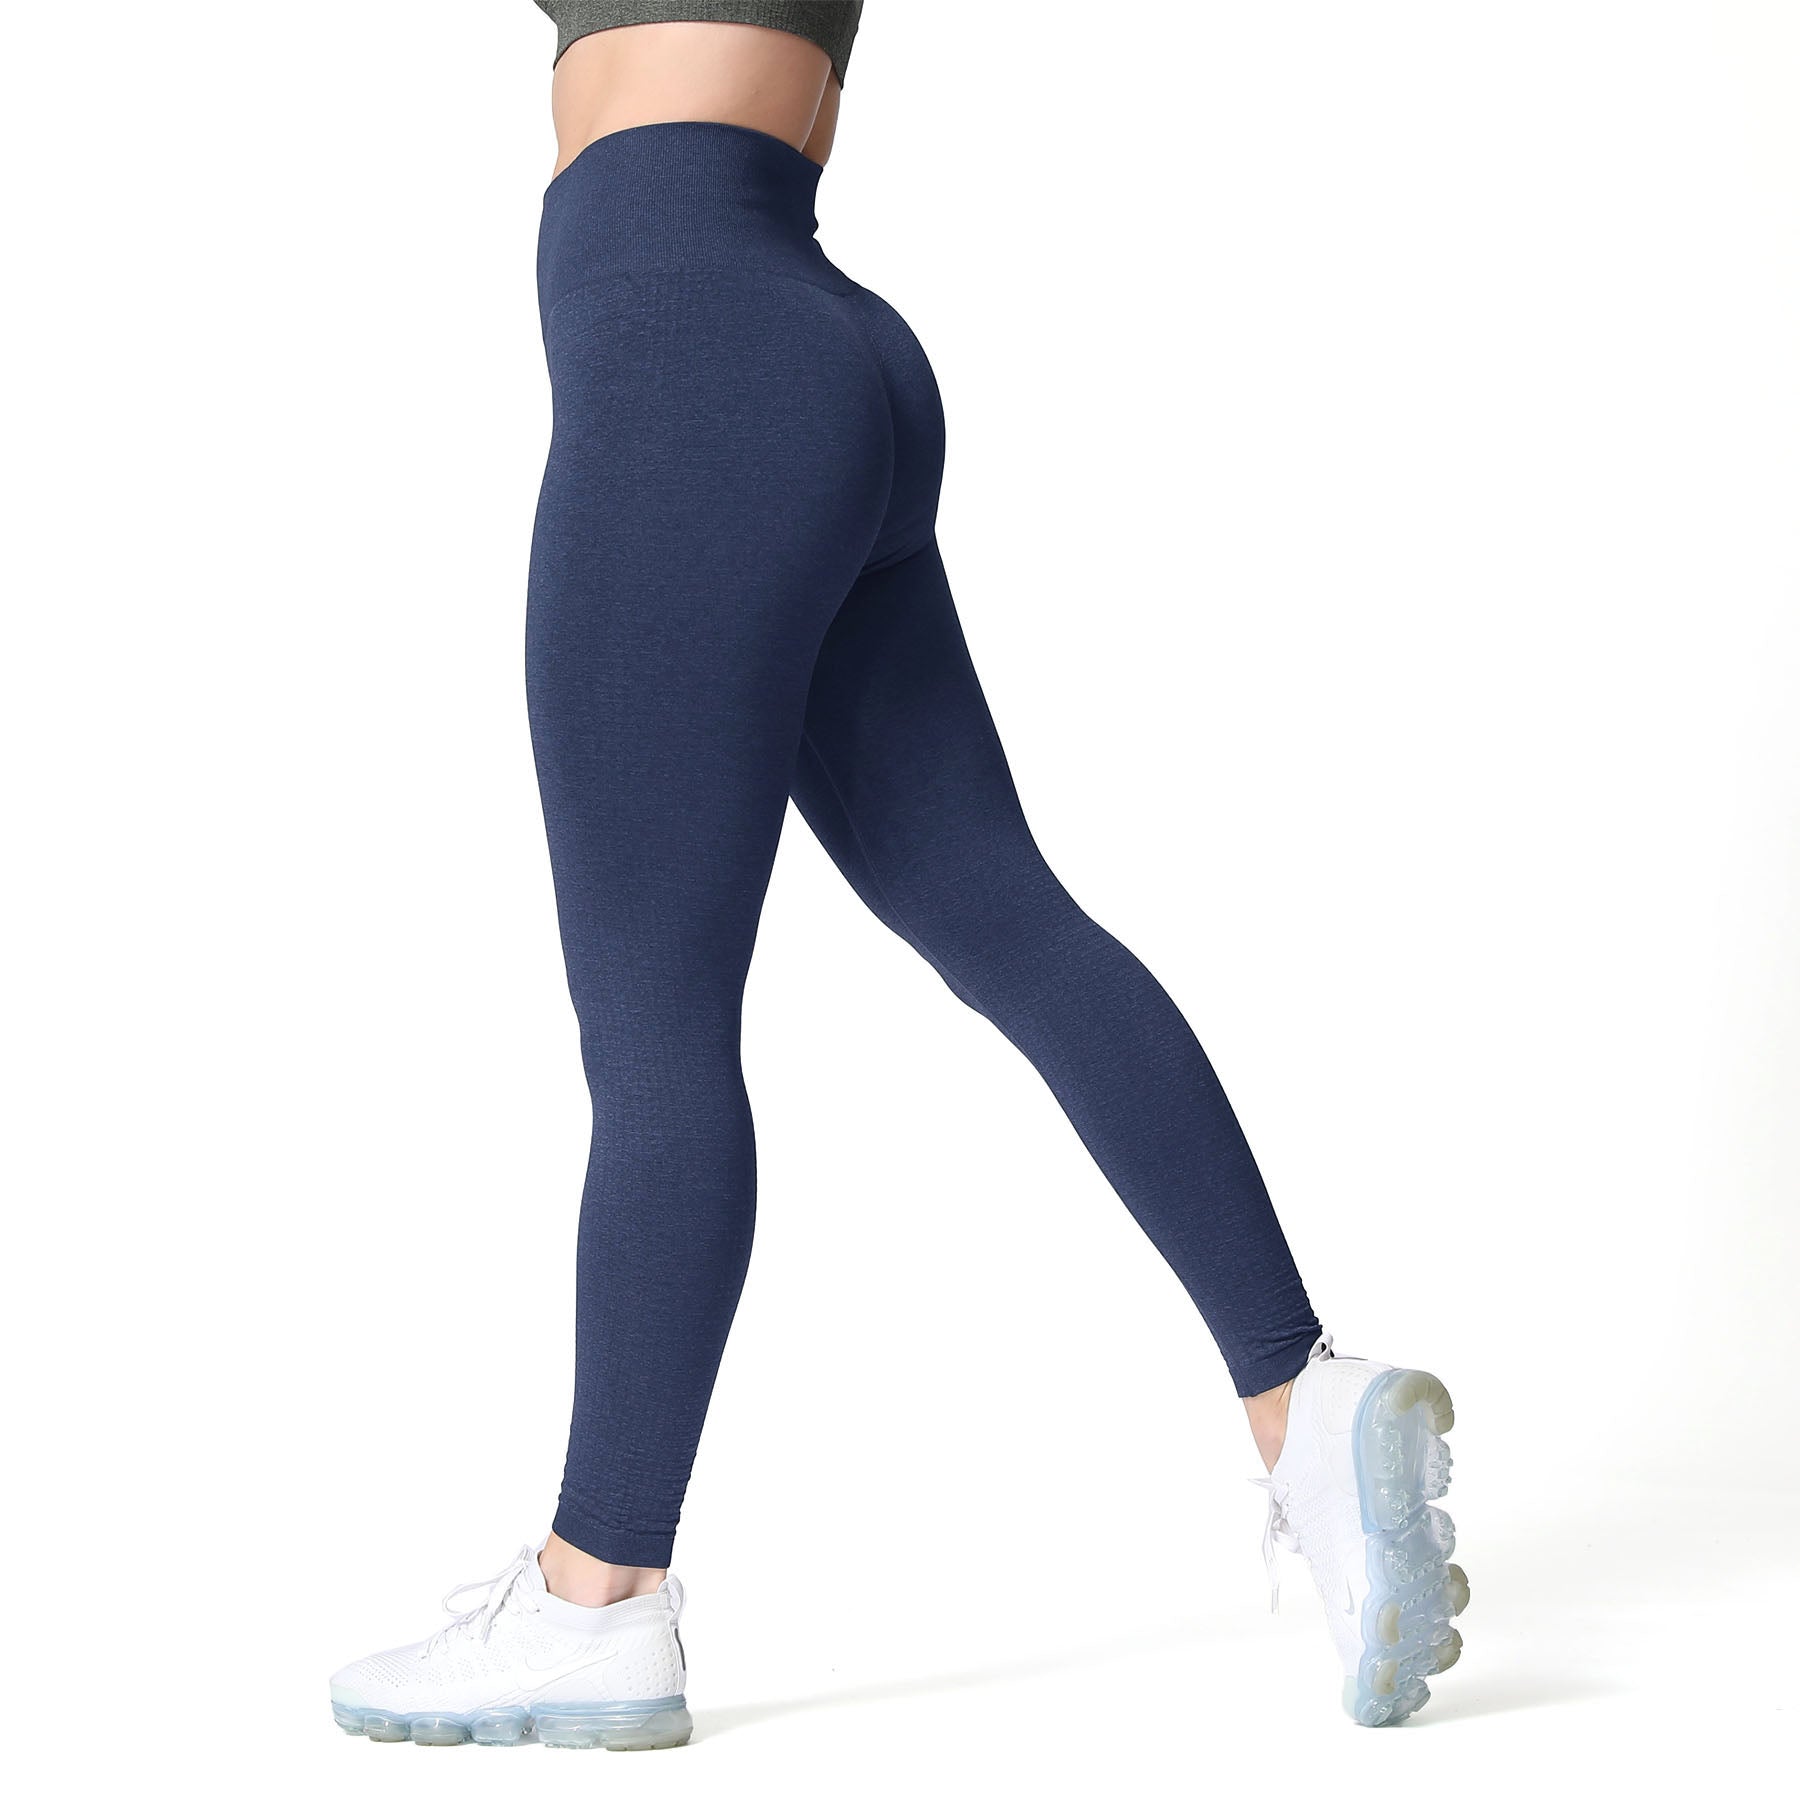 Active Seamless Leggings For Women Slim Fit, Gradient Gym Legging, Perfect  For Formal Daily Parties And Tennis Balls For Walkers From Armelia, $20.51